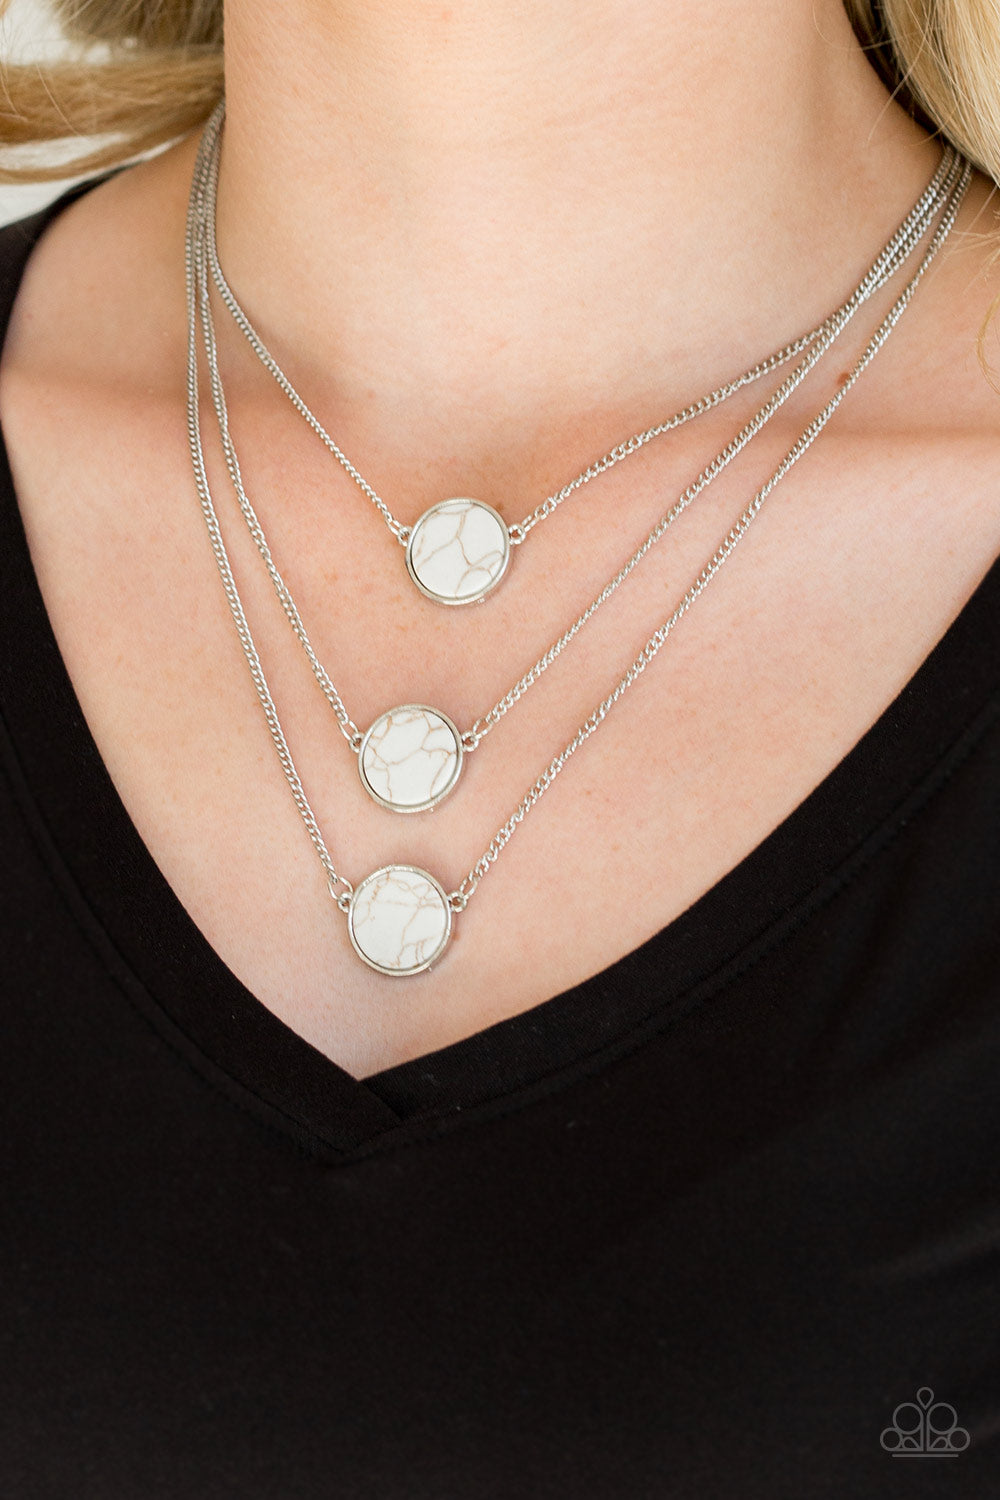 CEO OF CHIC - WHITE TRIPLE LAYERED SAND STONE NECKLACE